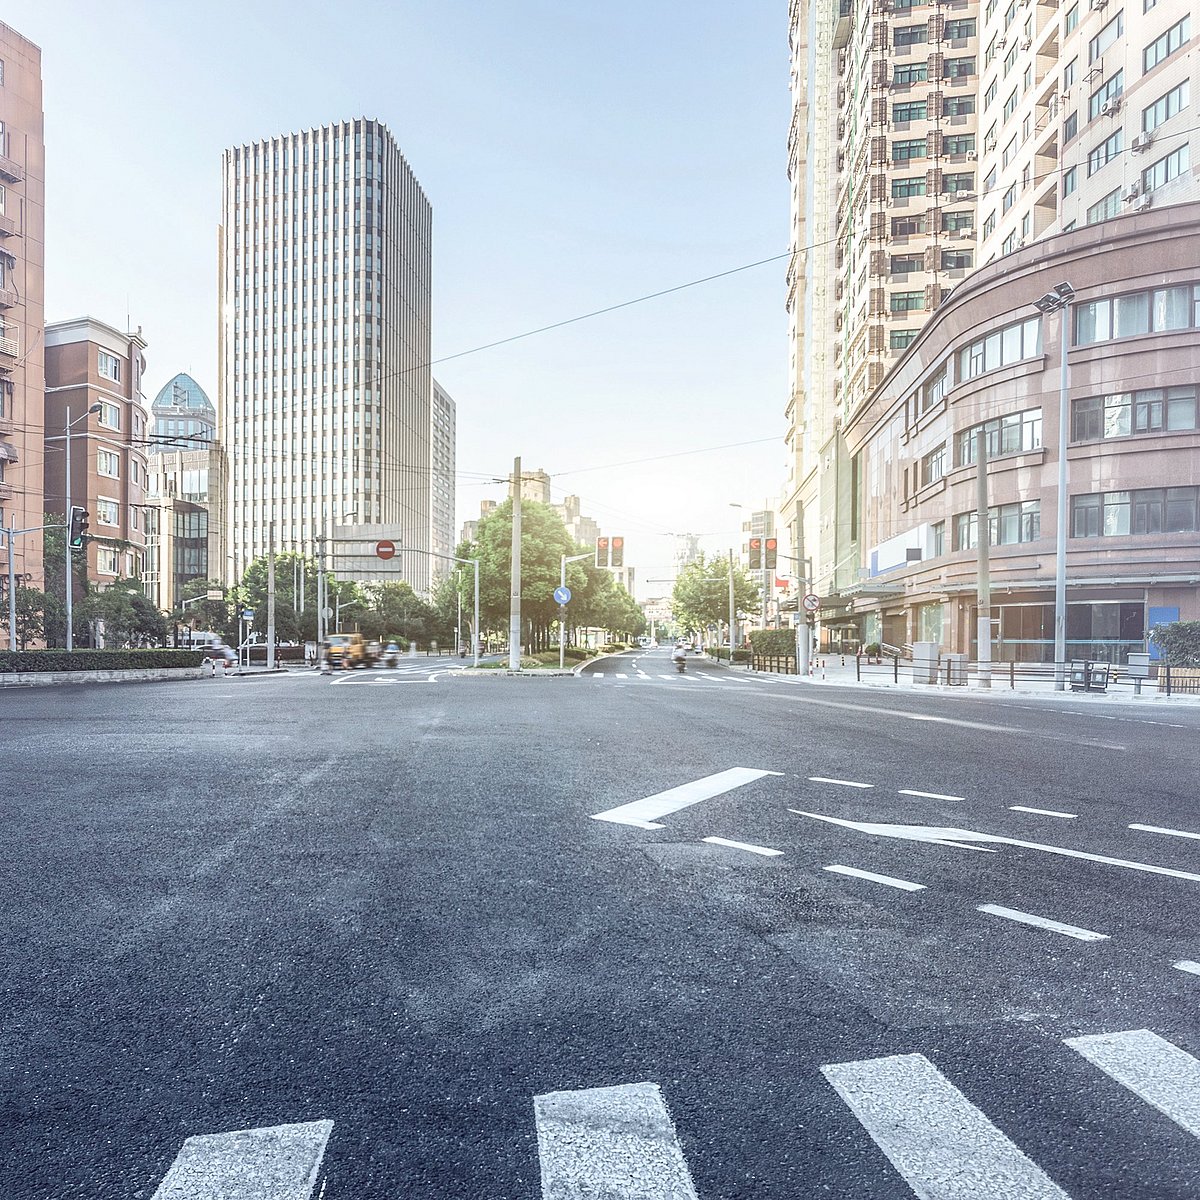 A street scene in a connected and smart city as an axample picture for the building materials article from IBU-tec